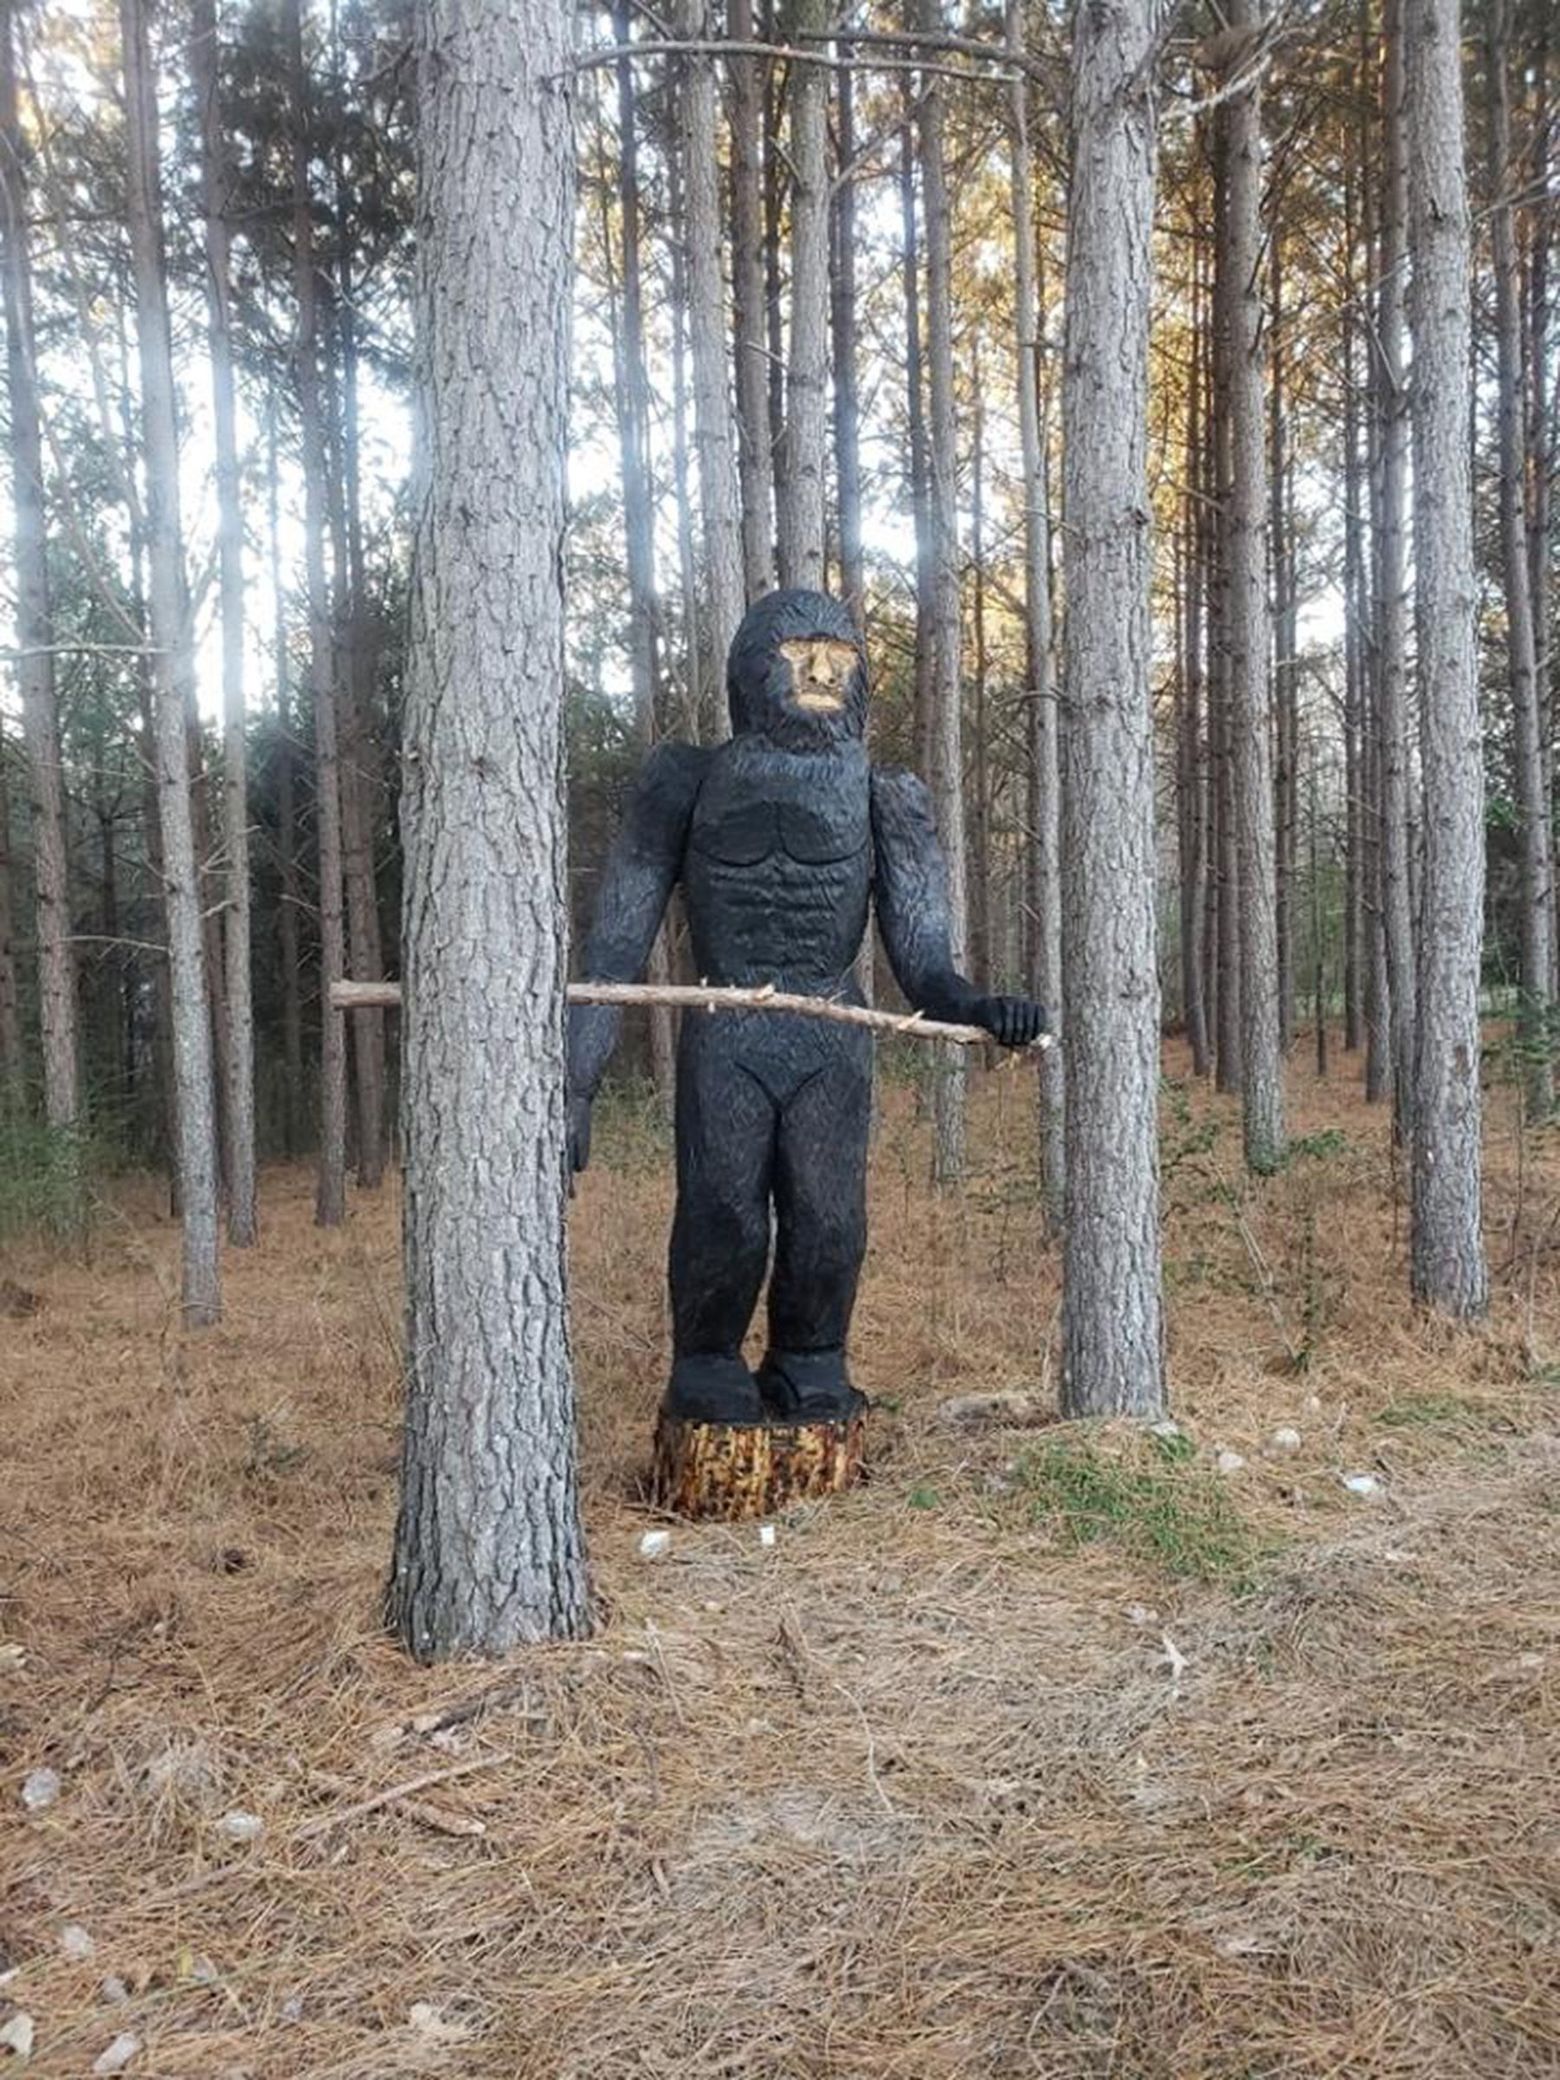 A missing Sasquatch statue was just found alone in the woods